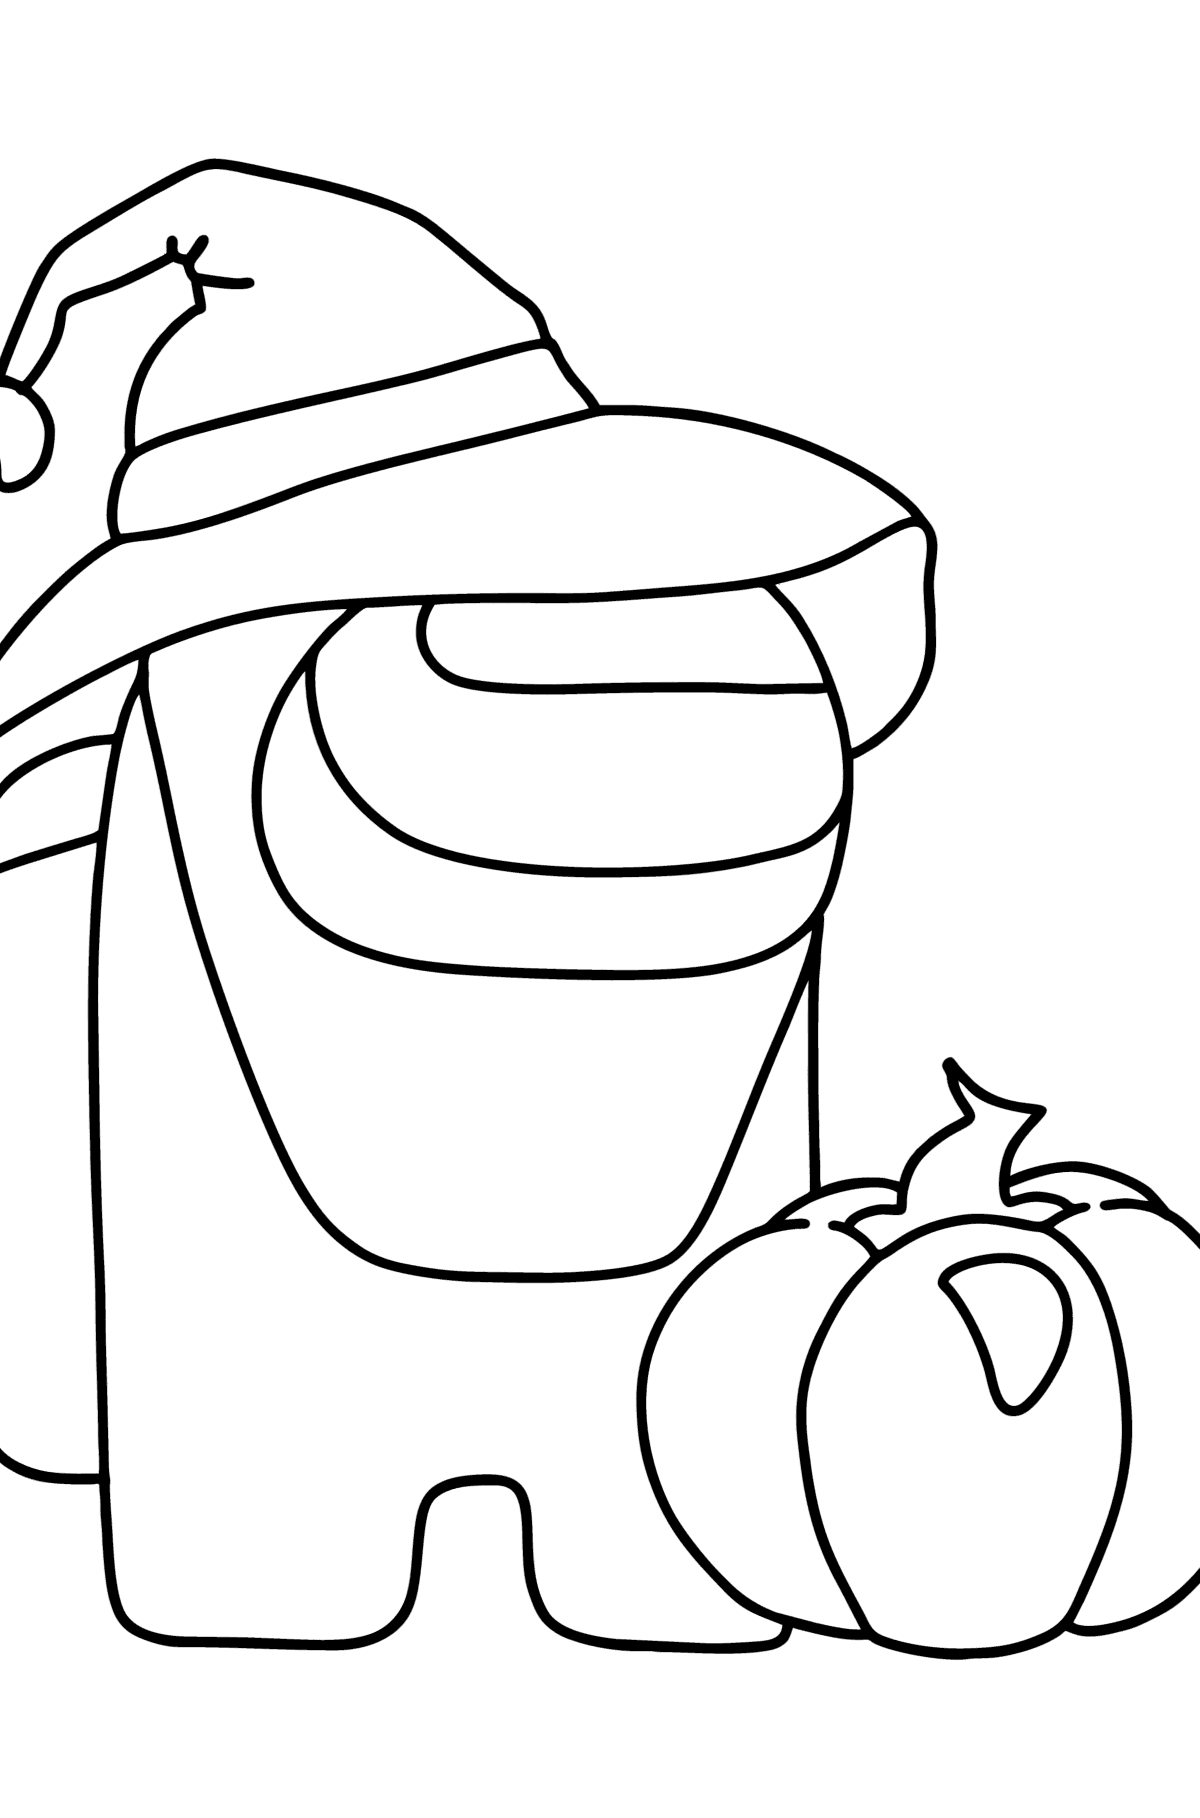 Among Us coloring page - Halloween - Coloring Pages for Kids